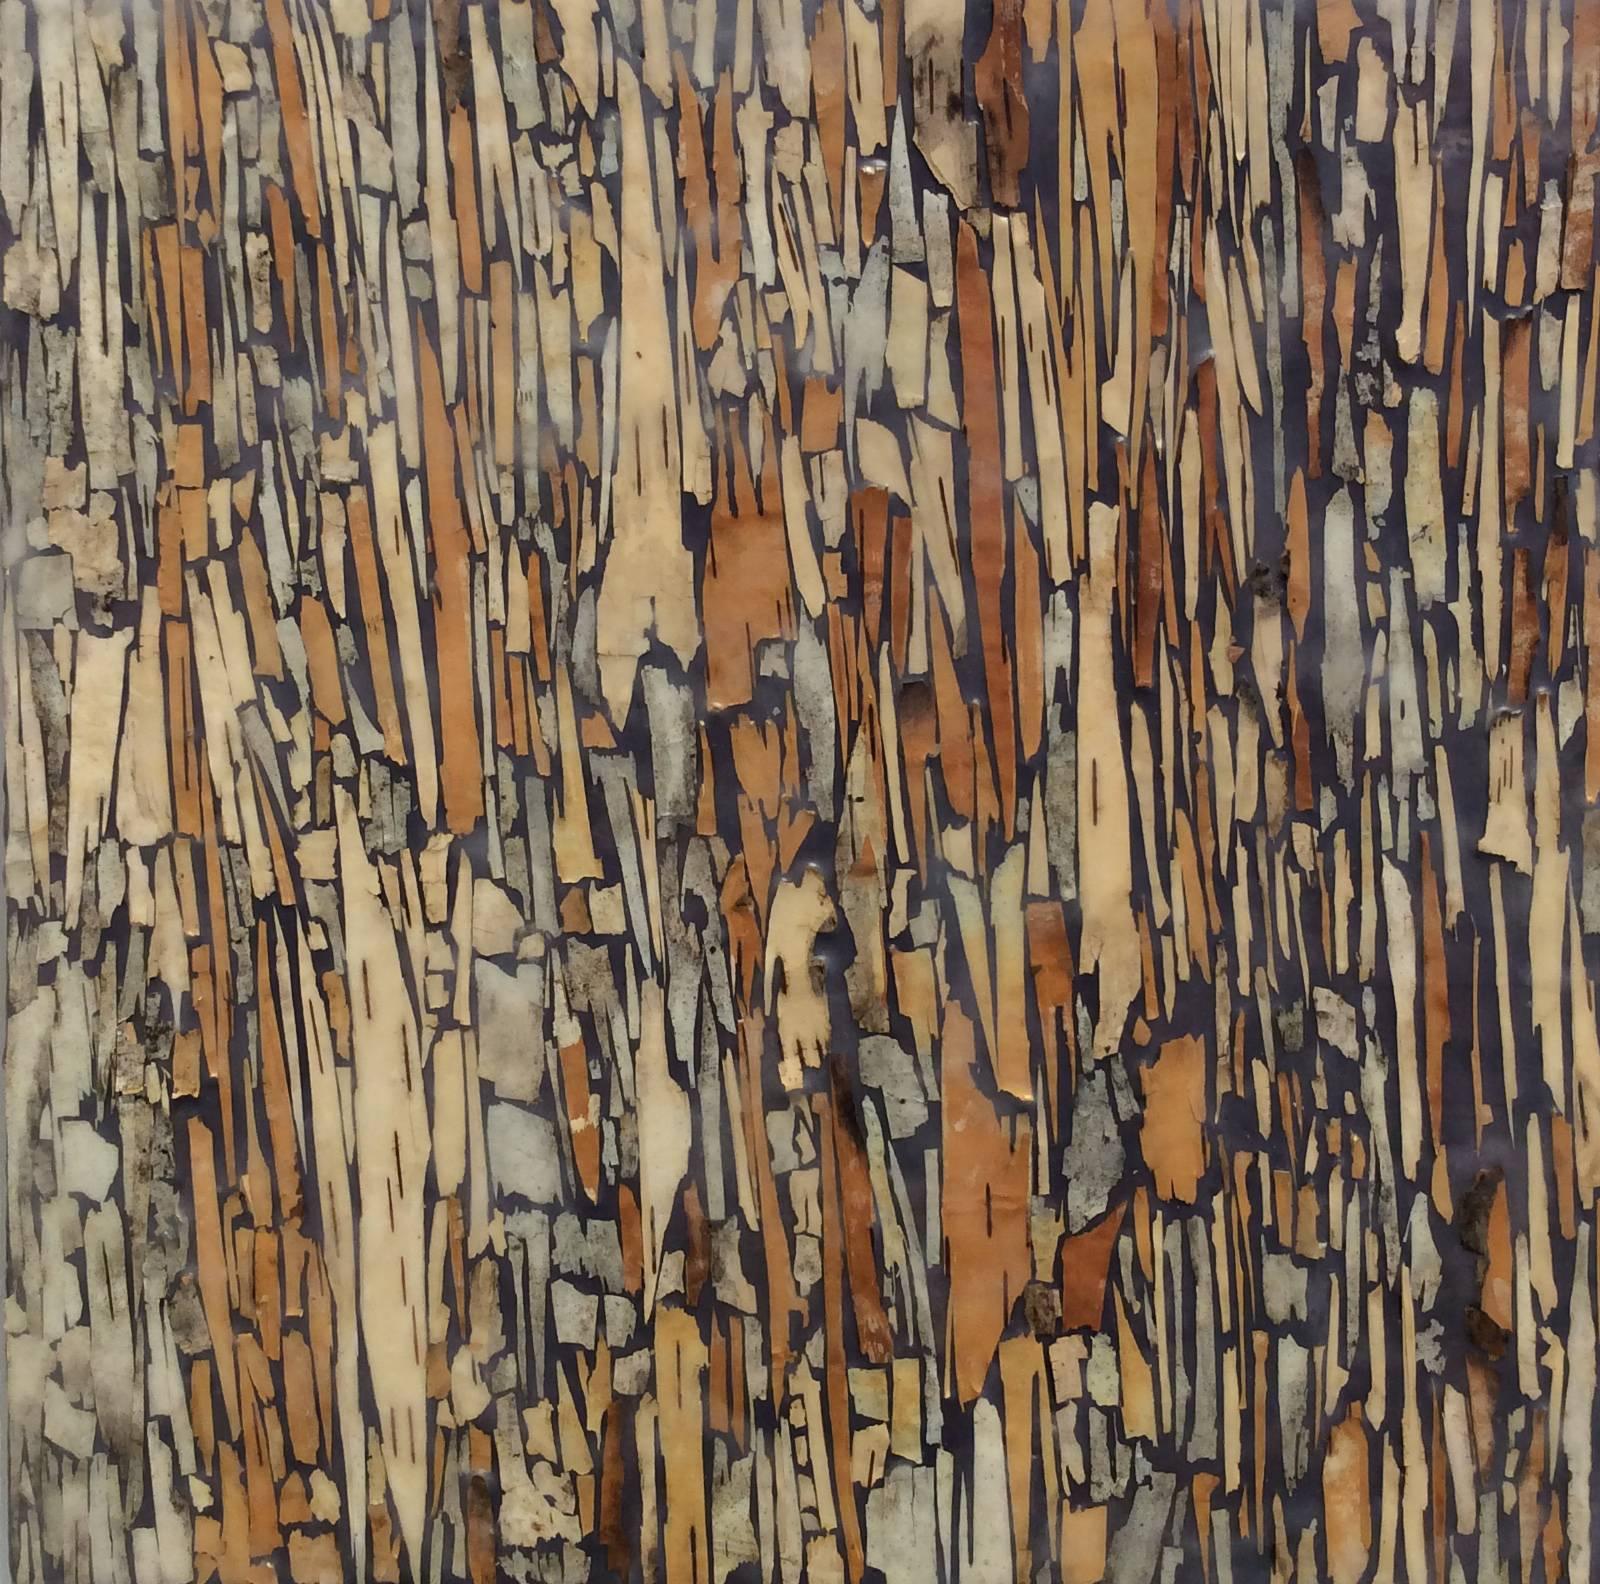 Birch 2 (Graphic Encaustic Painting with Brown Birch Bark on Wood Panel)